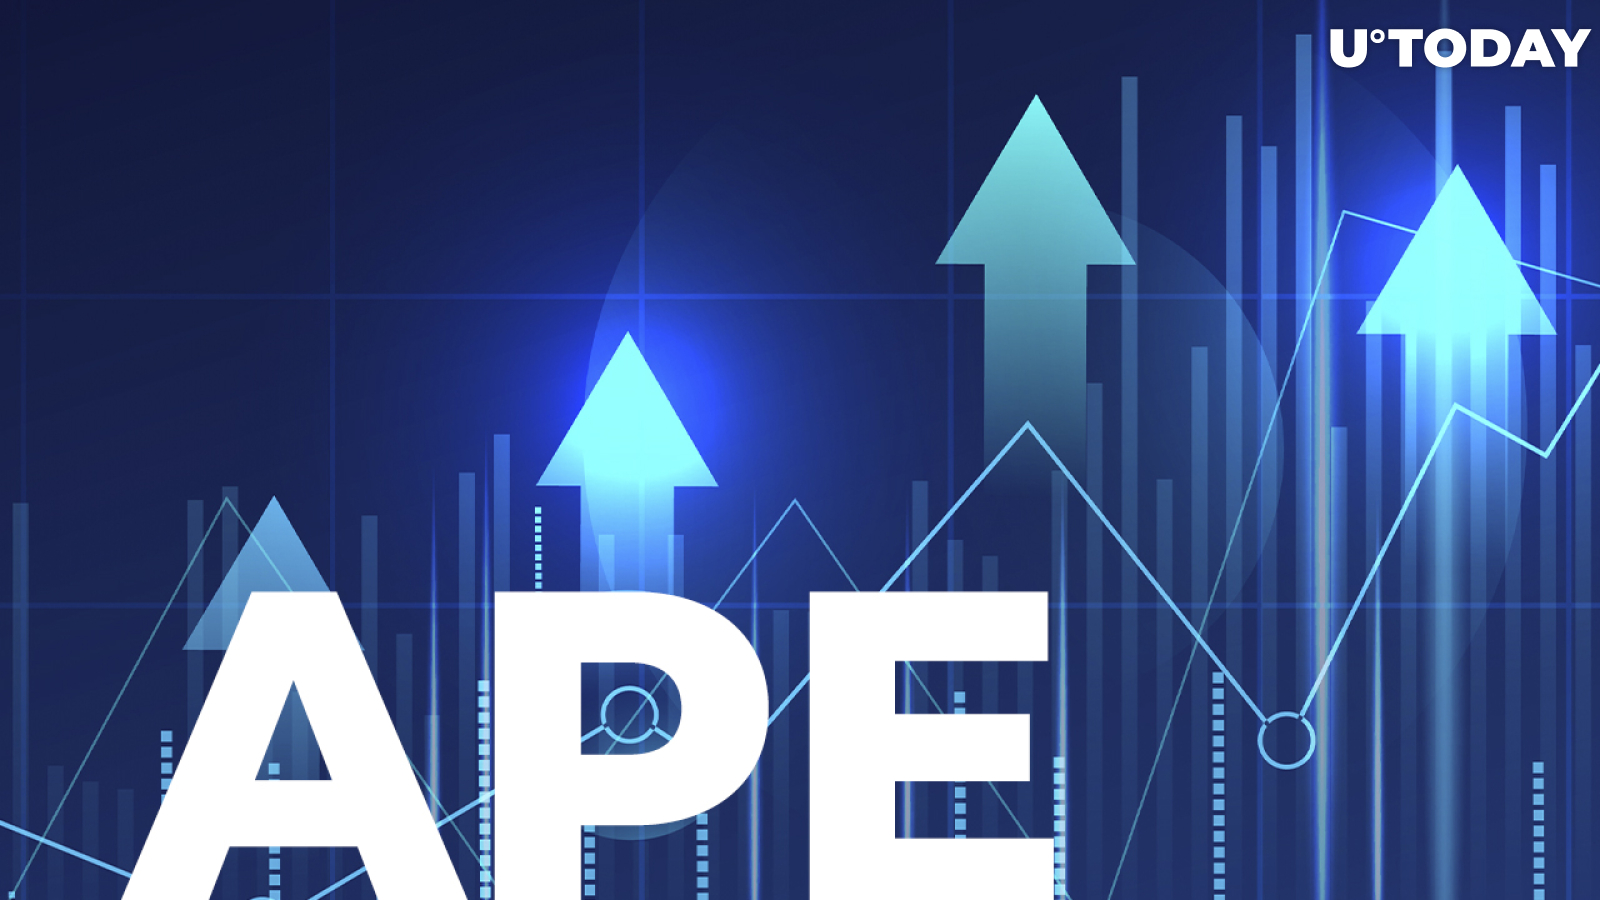 APE up 70% in 2 Days Thanks to Metaverse Teaser